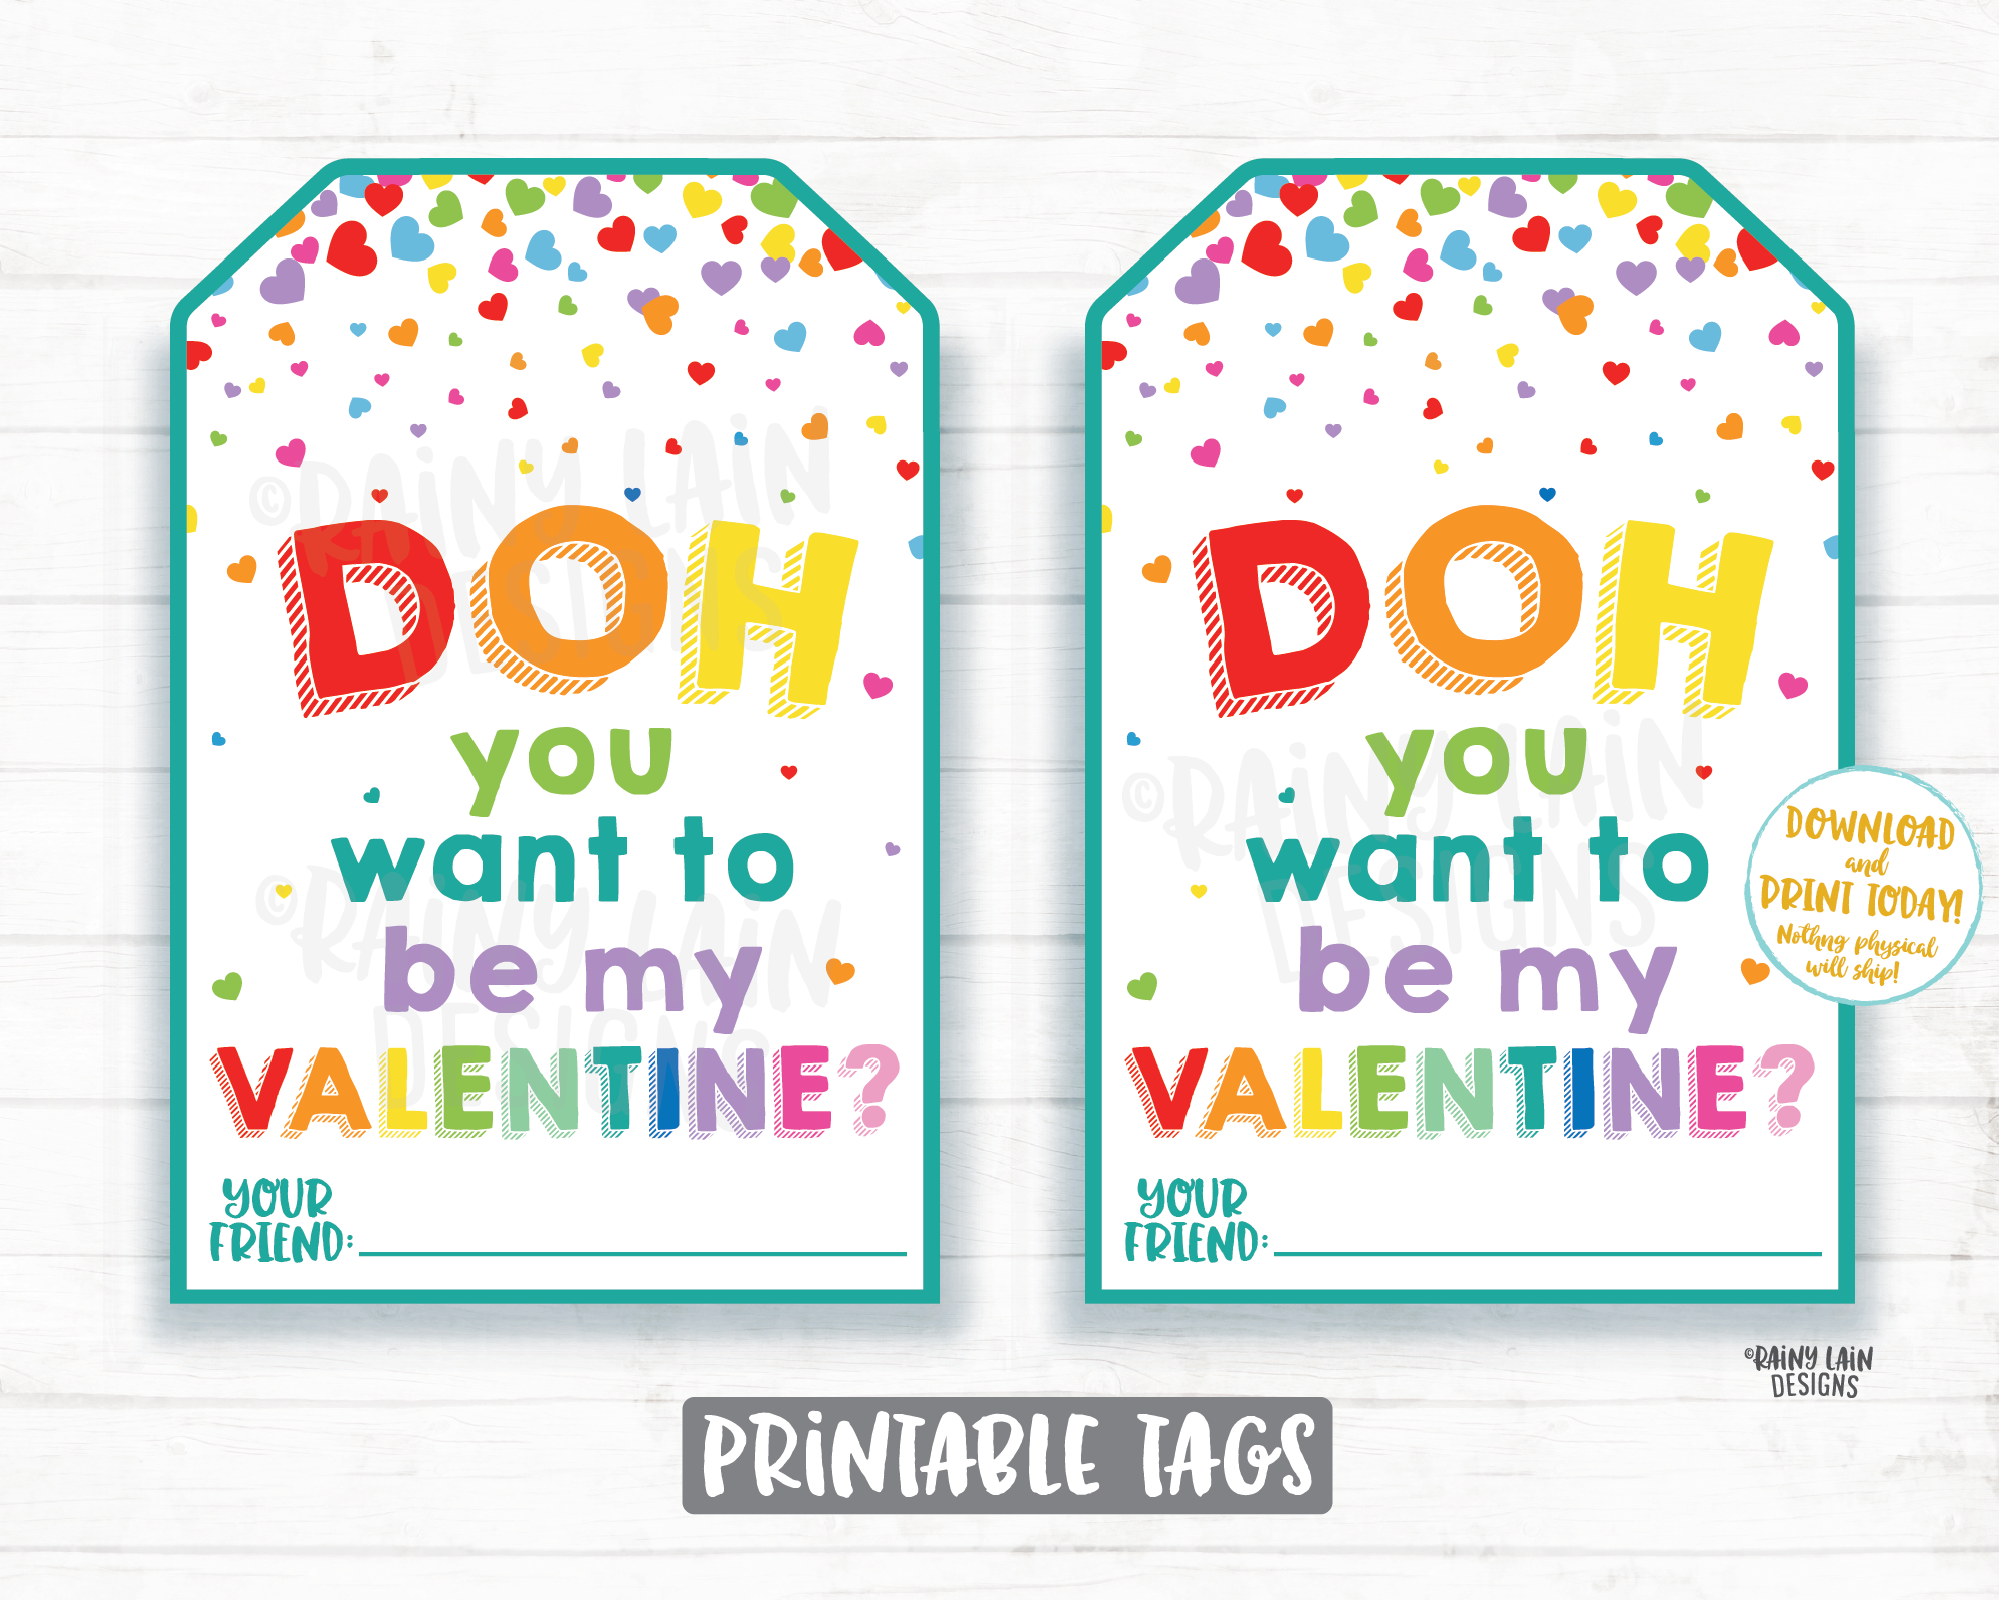 Doh you want to be my Valentine, Play dough Valentine Tag, Playdough, Preschool Valentines Classroom Printable Kids Non-Candy Valentine Tags